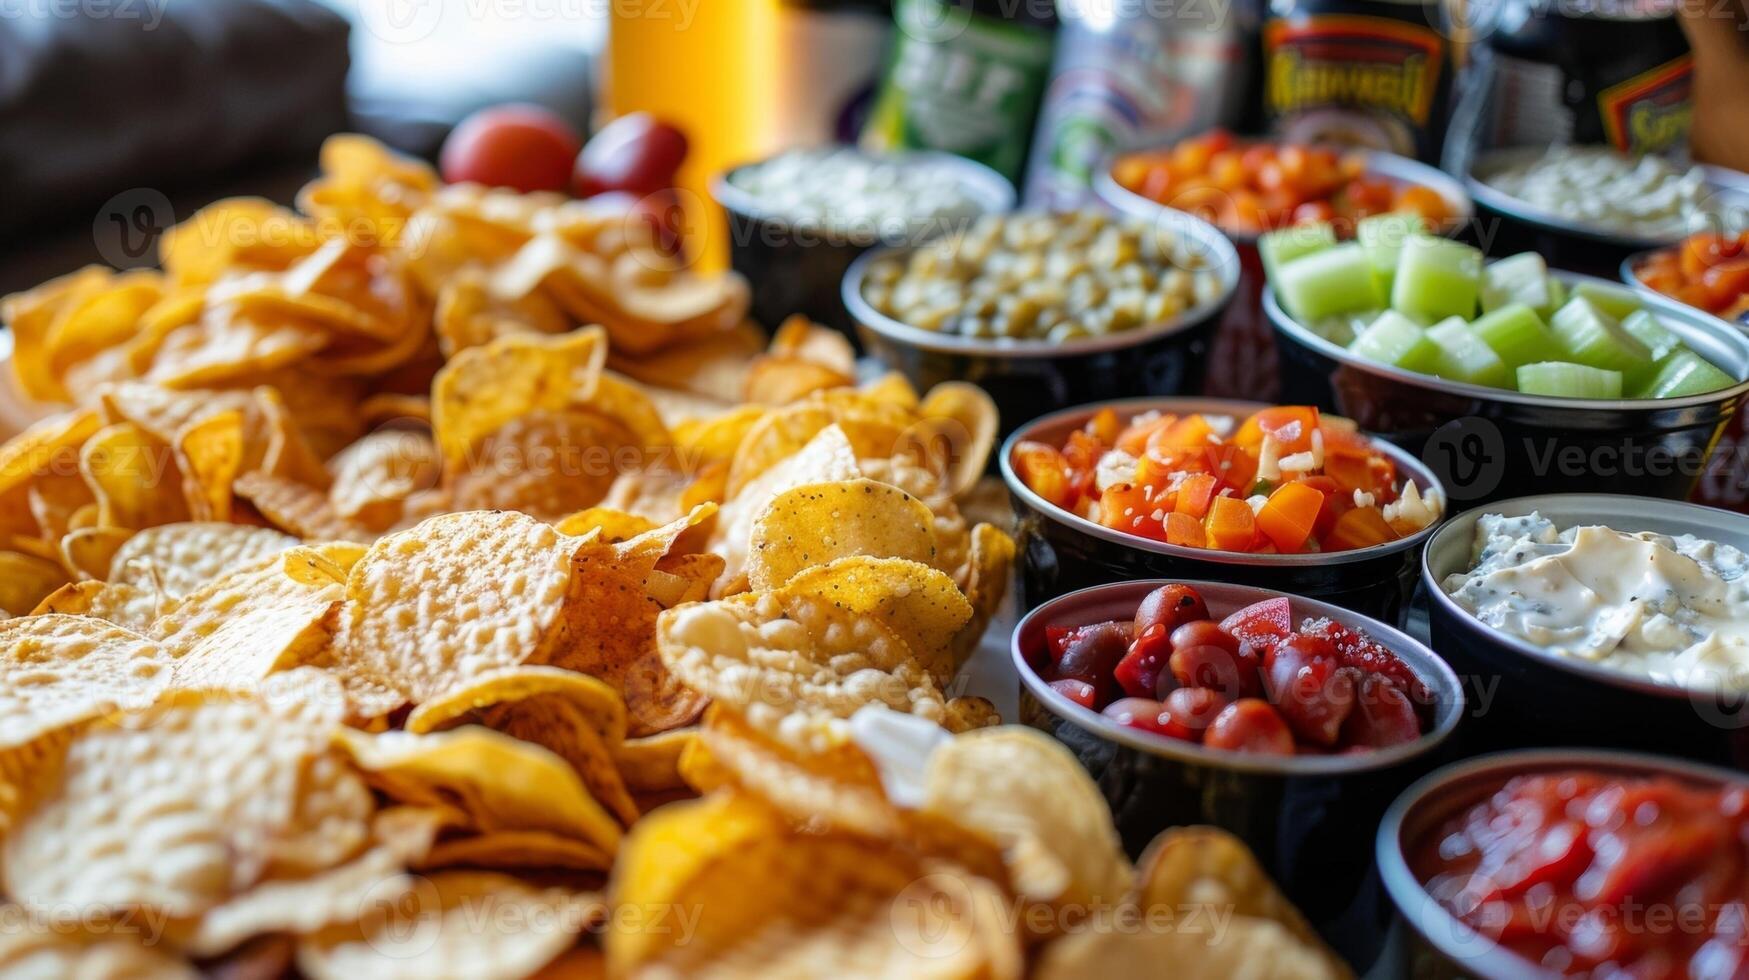 A closeup shot of a game day snack platter filled with chips dips and veggies surrounded by cans of zeroalcohol beer photo